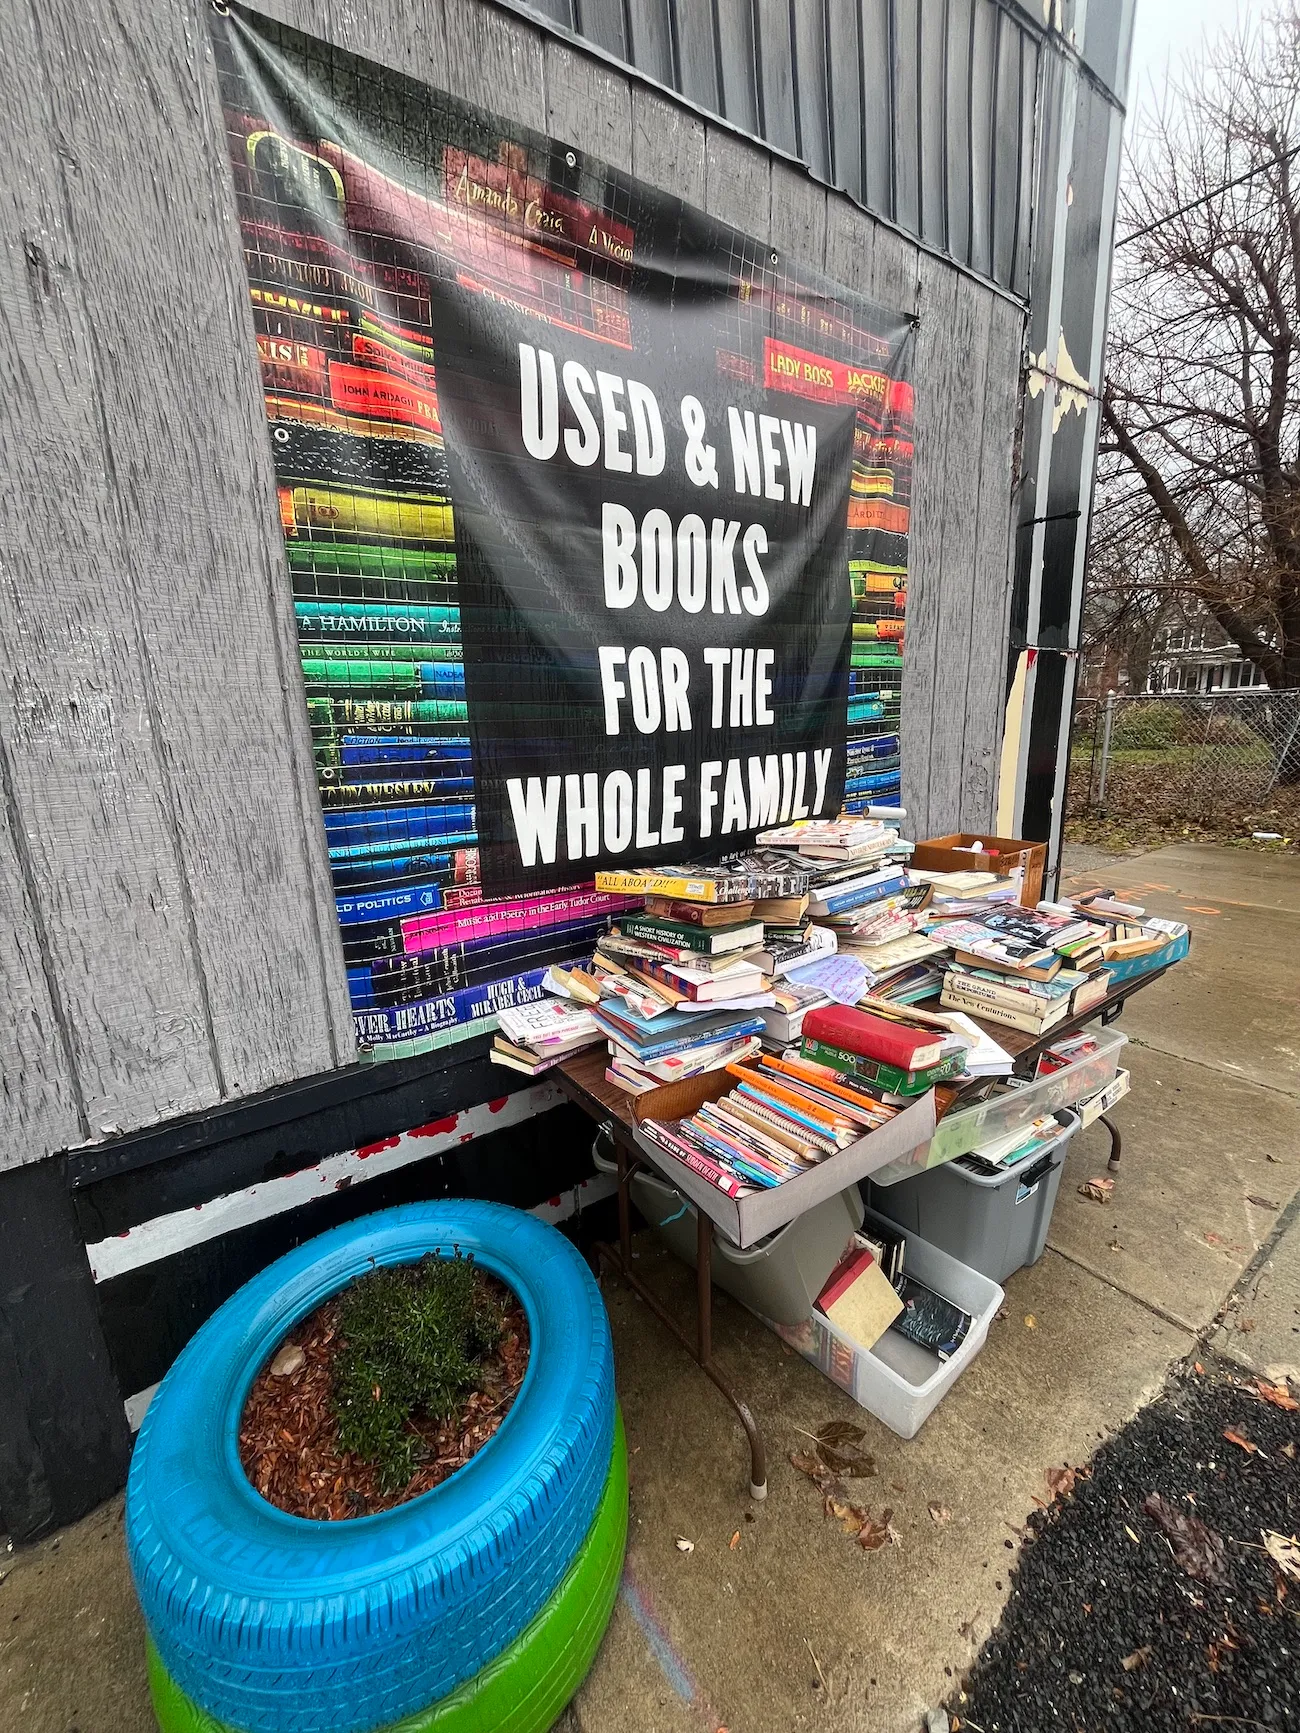 A stack of books on a table outside underneath a colorful banner reading "Used & New Books For The Whole Family." Two stacked car tires, one blue and one green, converted into a planter are in the foreground.